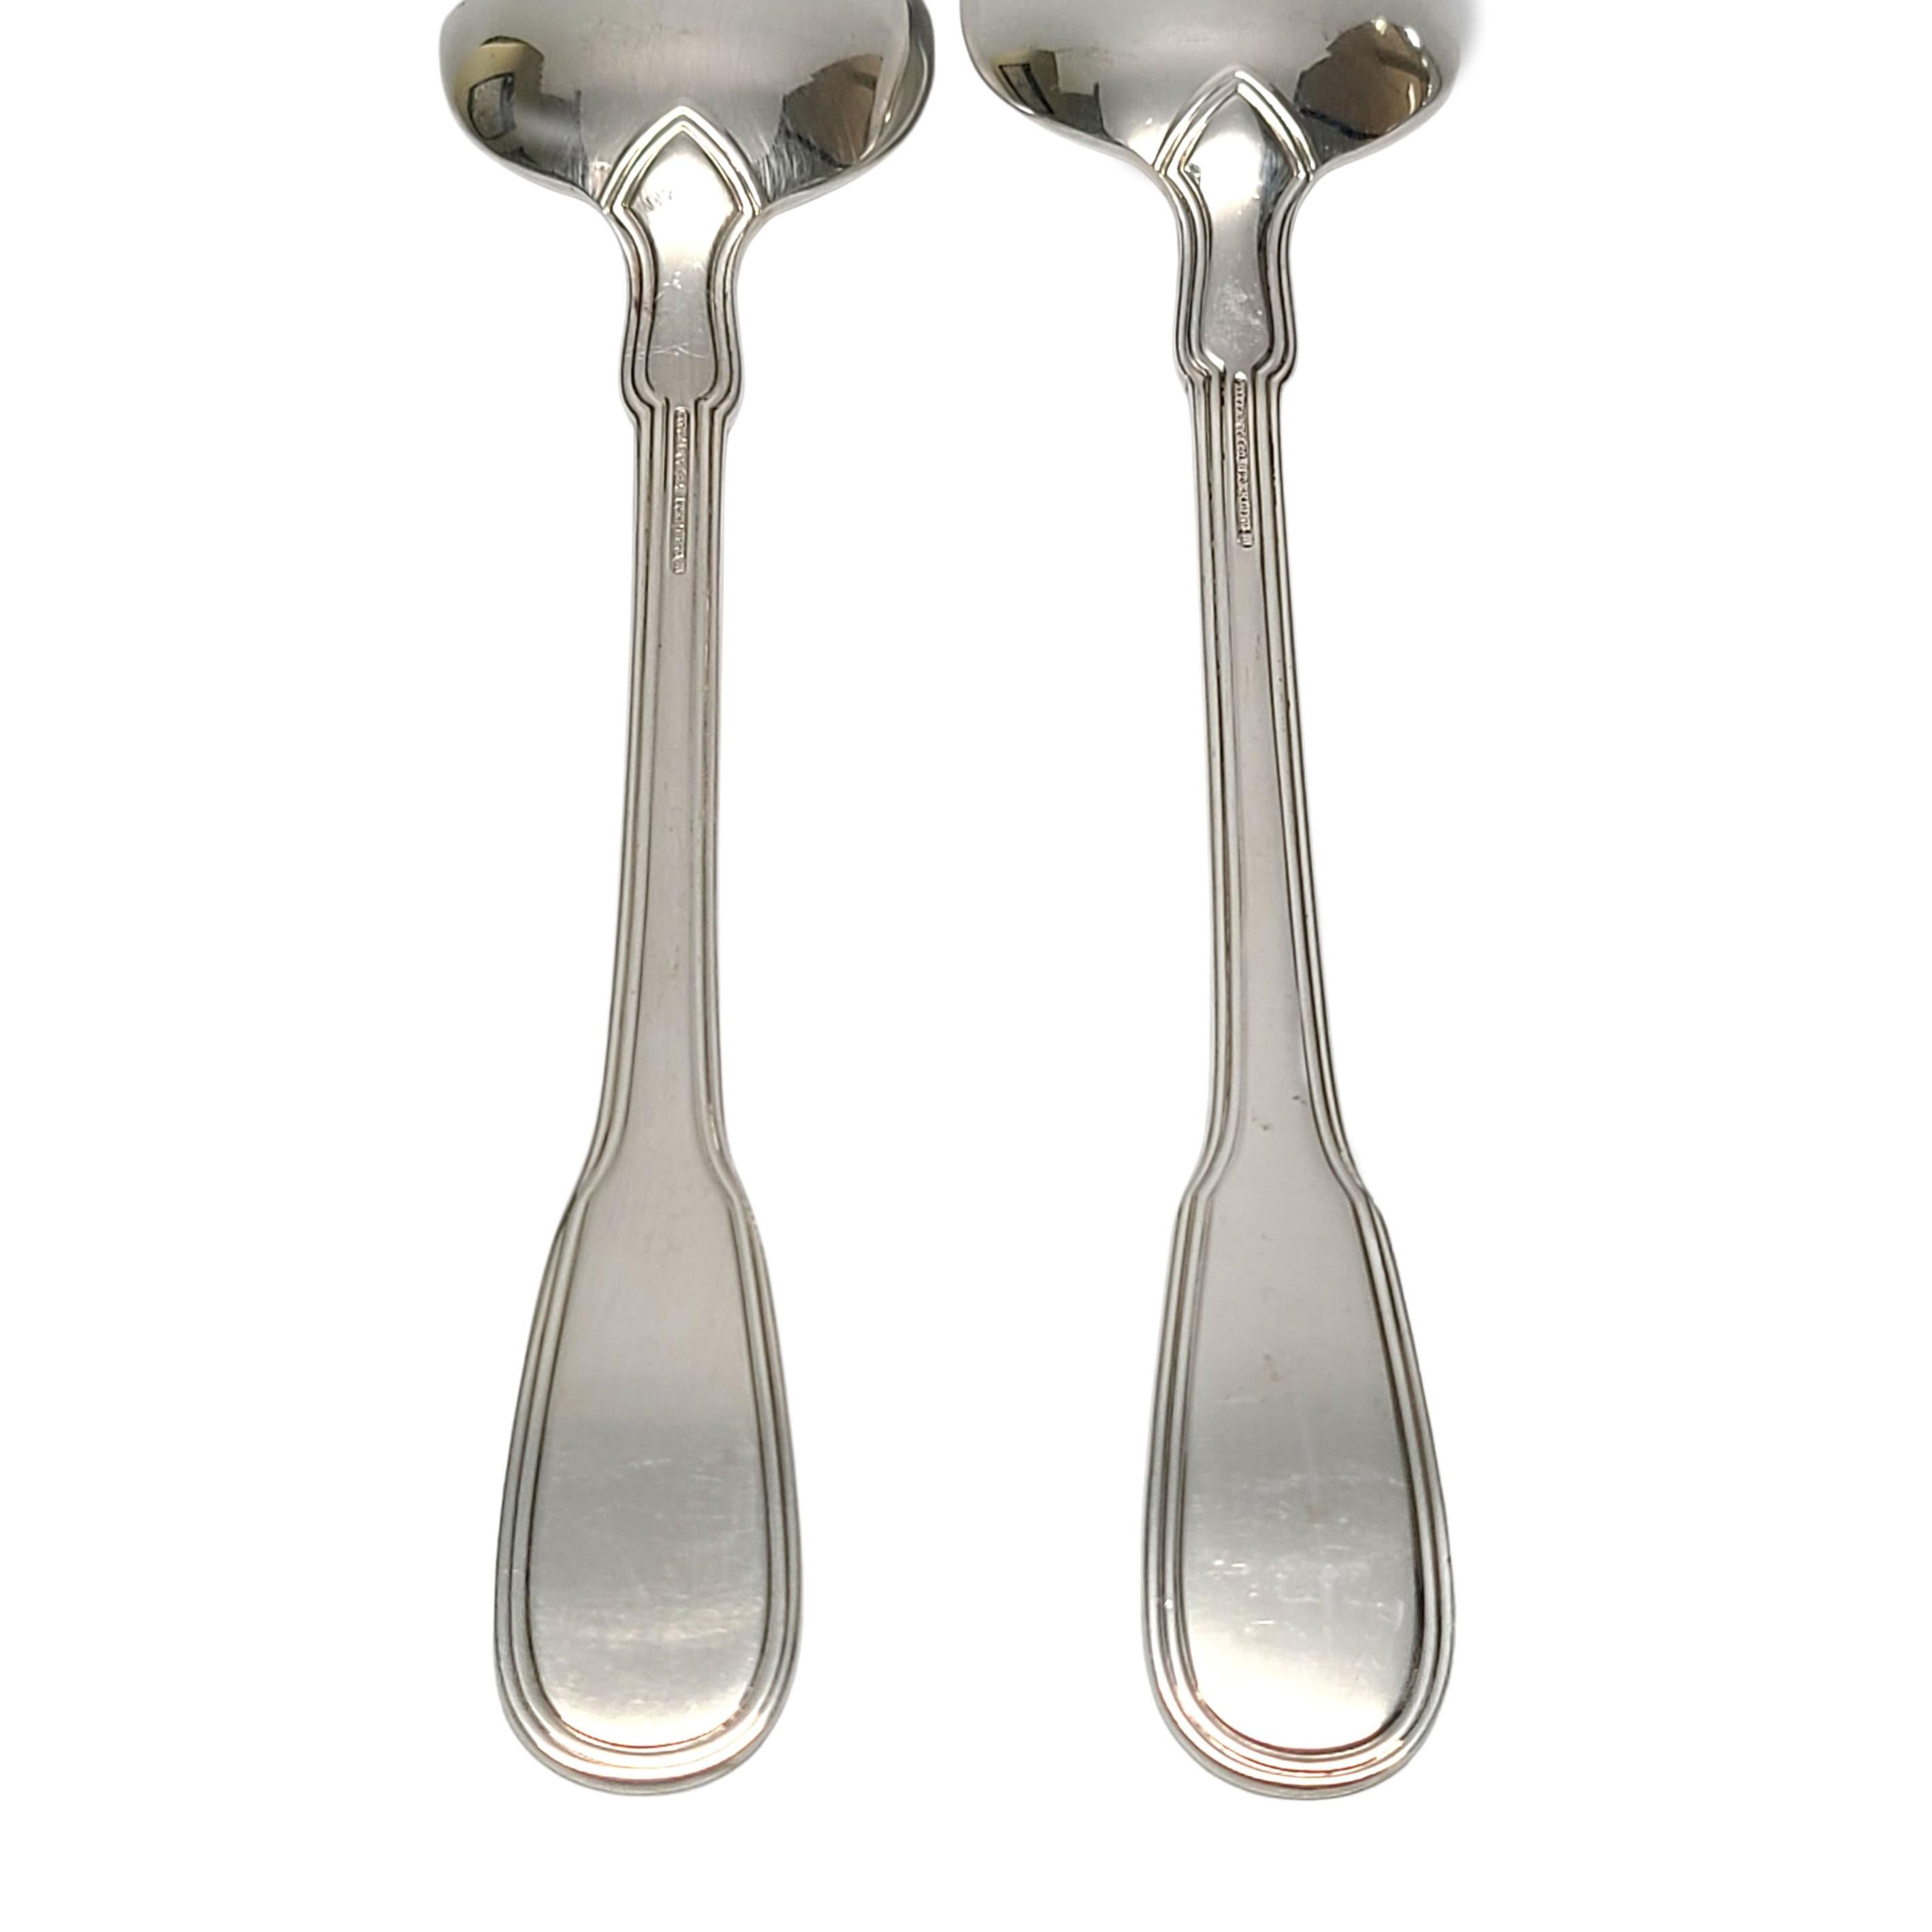 Set of 2 Tiffany & Co Sterling Silver Gramercy Serving Table Spoon with Monogram In Good Condition For Sale In Washington Depot, CT